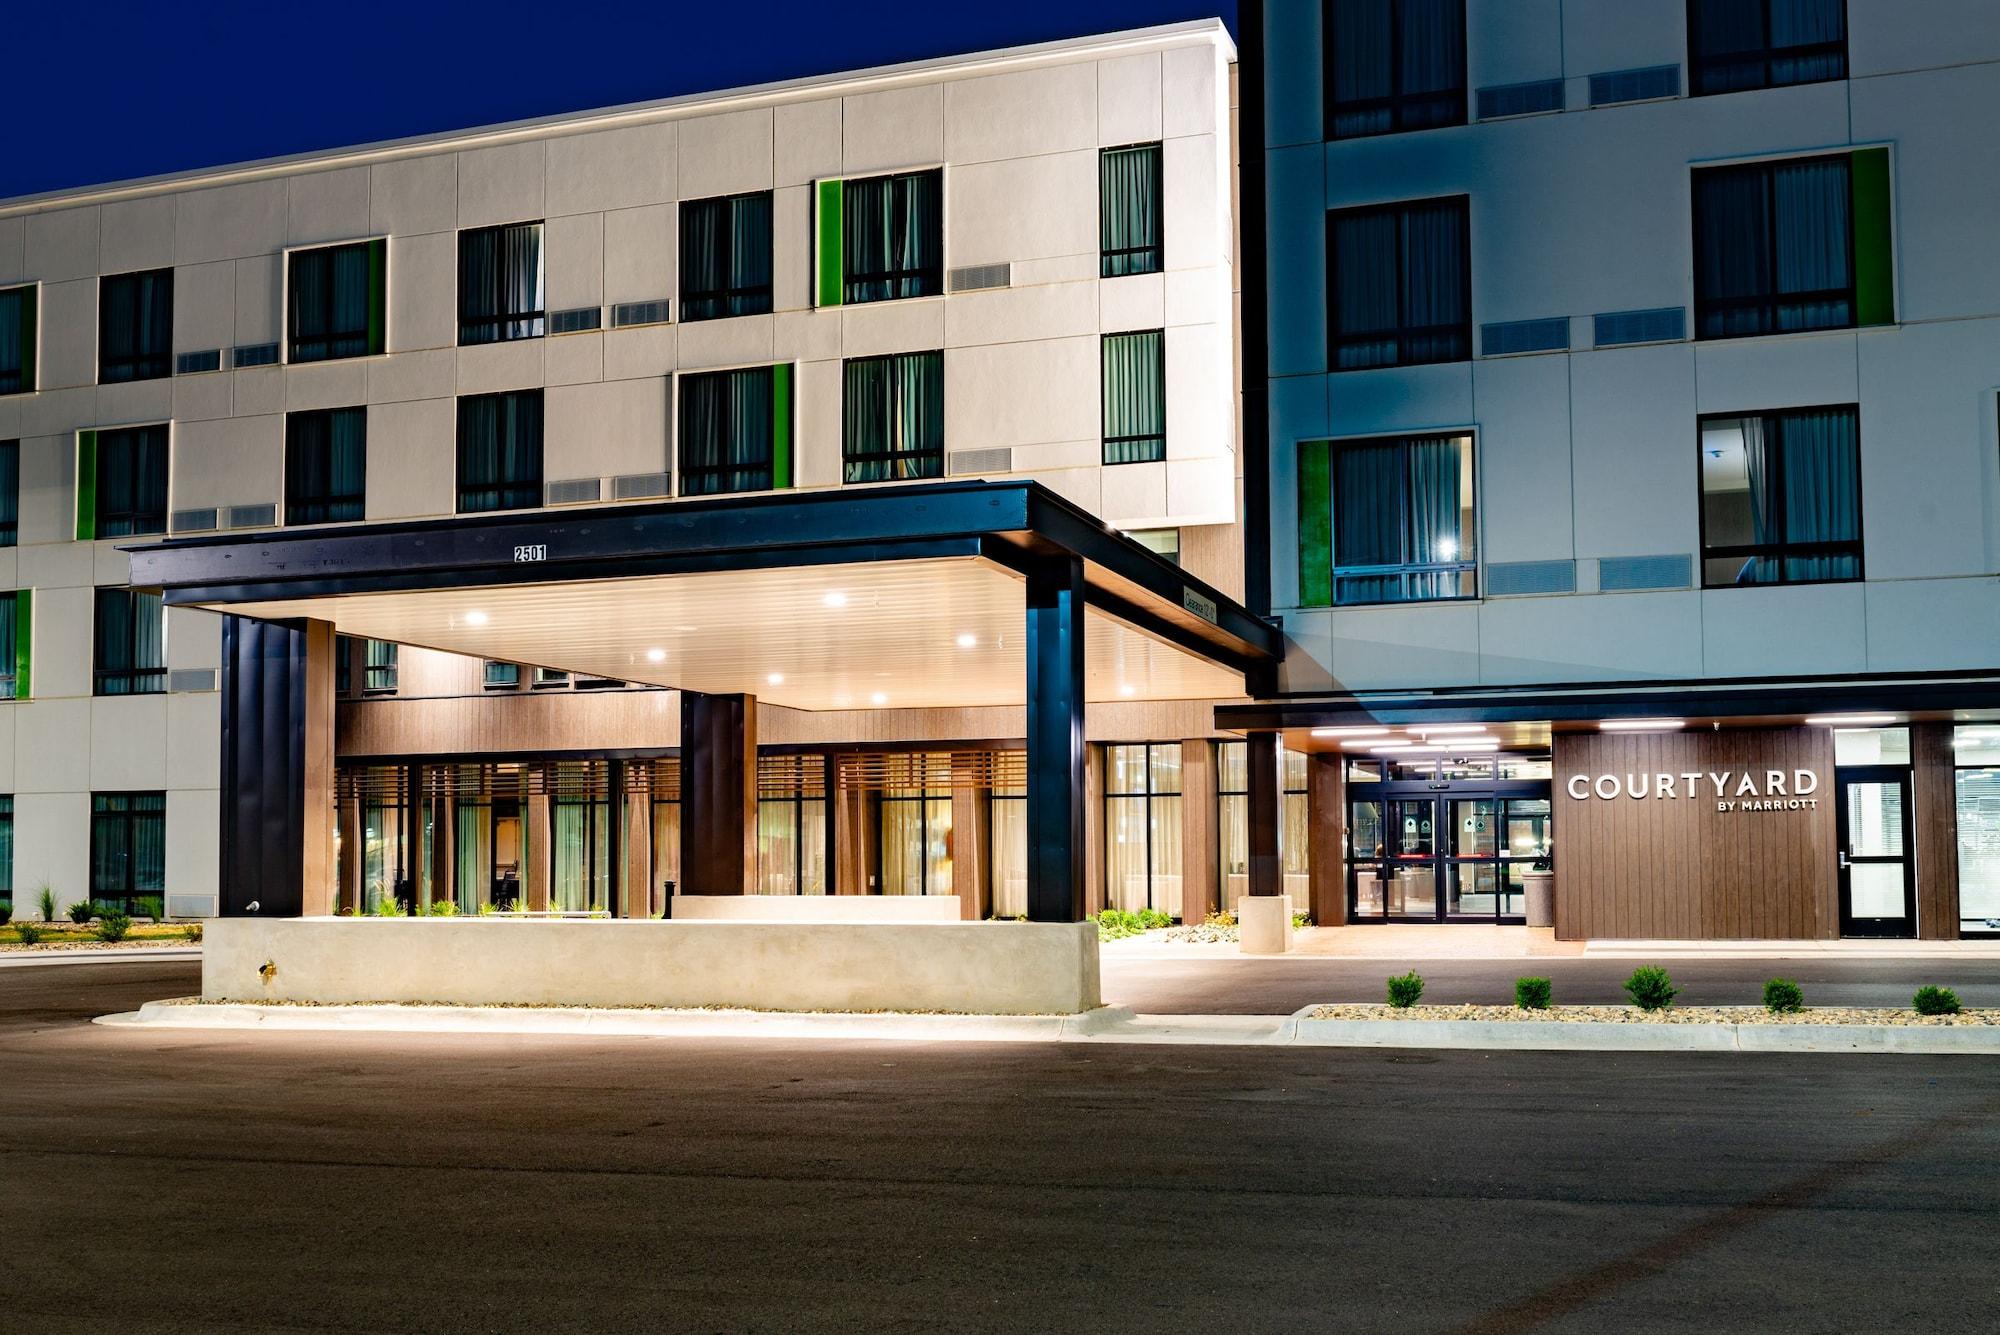 Courtyard by Marriott Omaha East/Council Bluffs, IA image